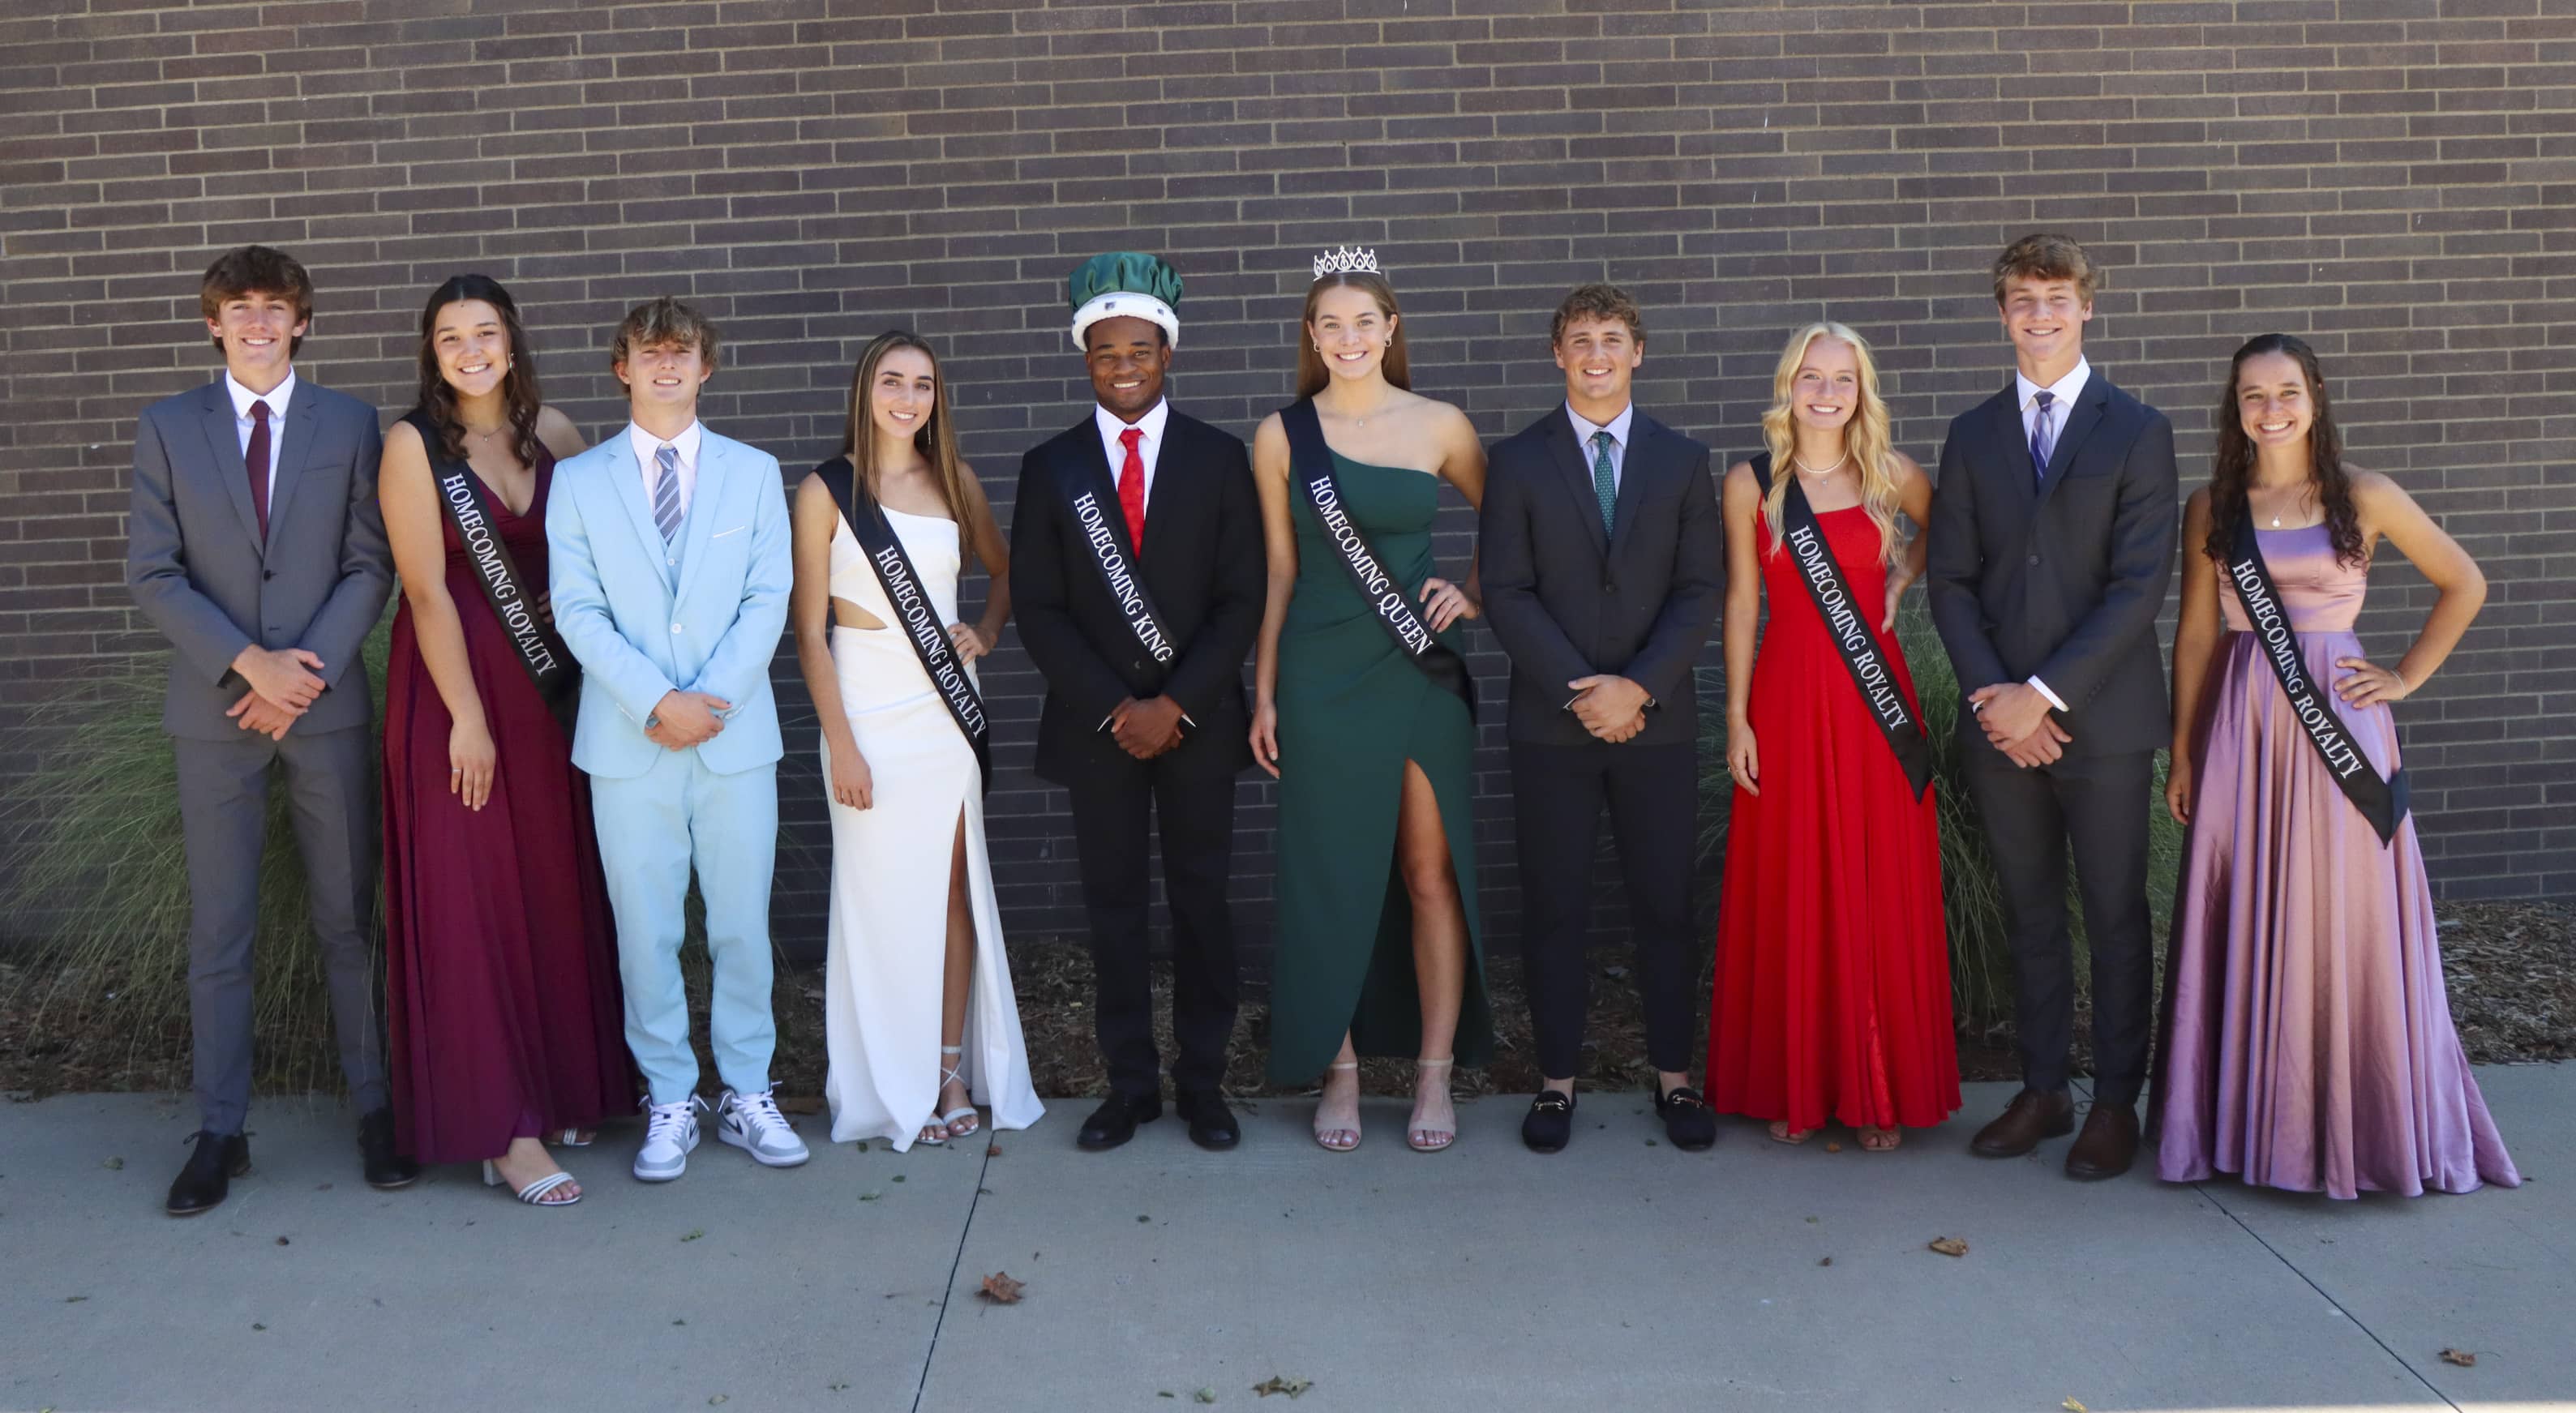 Hello Homecoming: Meet the 2022 Homecoming Court – The Flor-Ala